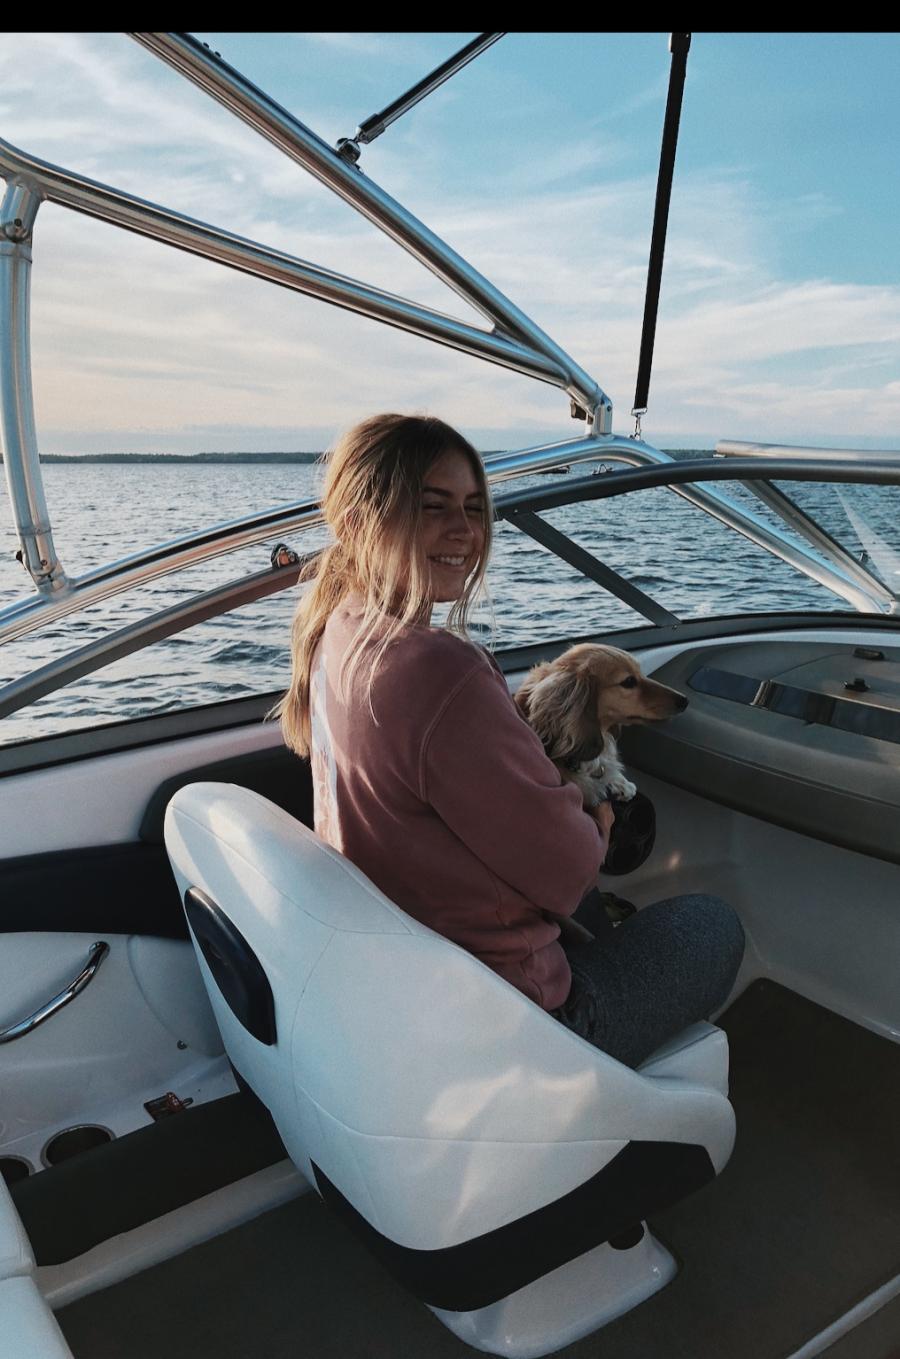 Brooke deRocquigny sitting on a boat holding a dog